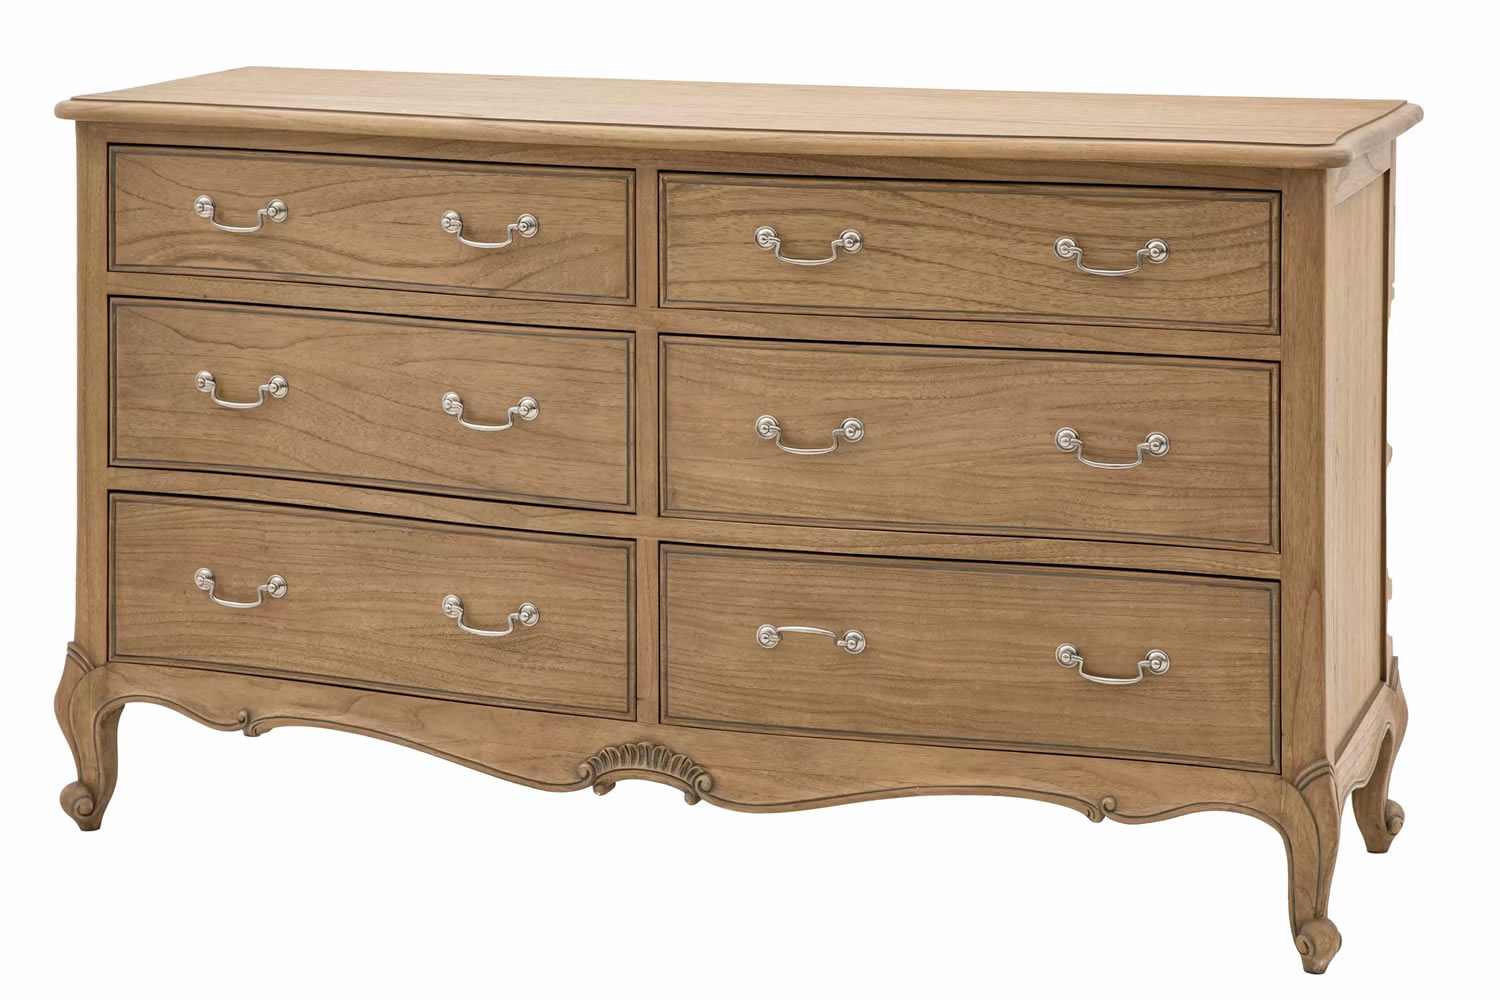 View Chic 6 Drawer Chest Weathered Wide Bedroom Storage Unit With Sliding Drawers Crafted From Solid Mindi Wood Traditional French Furniture Design information